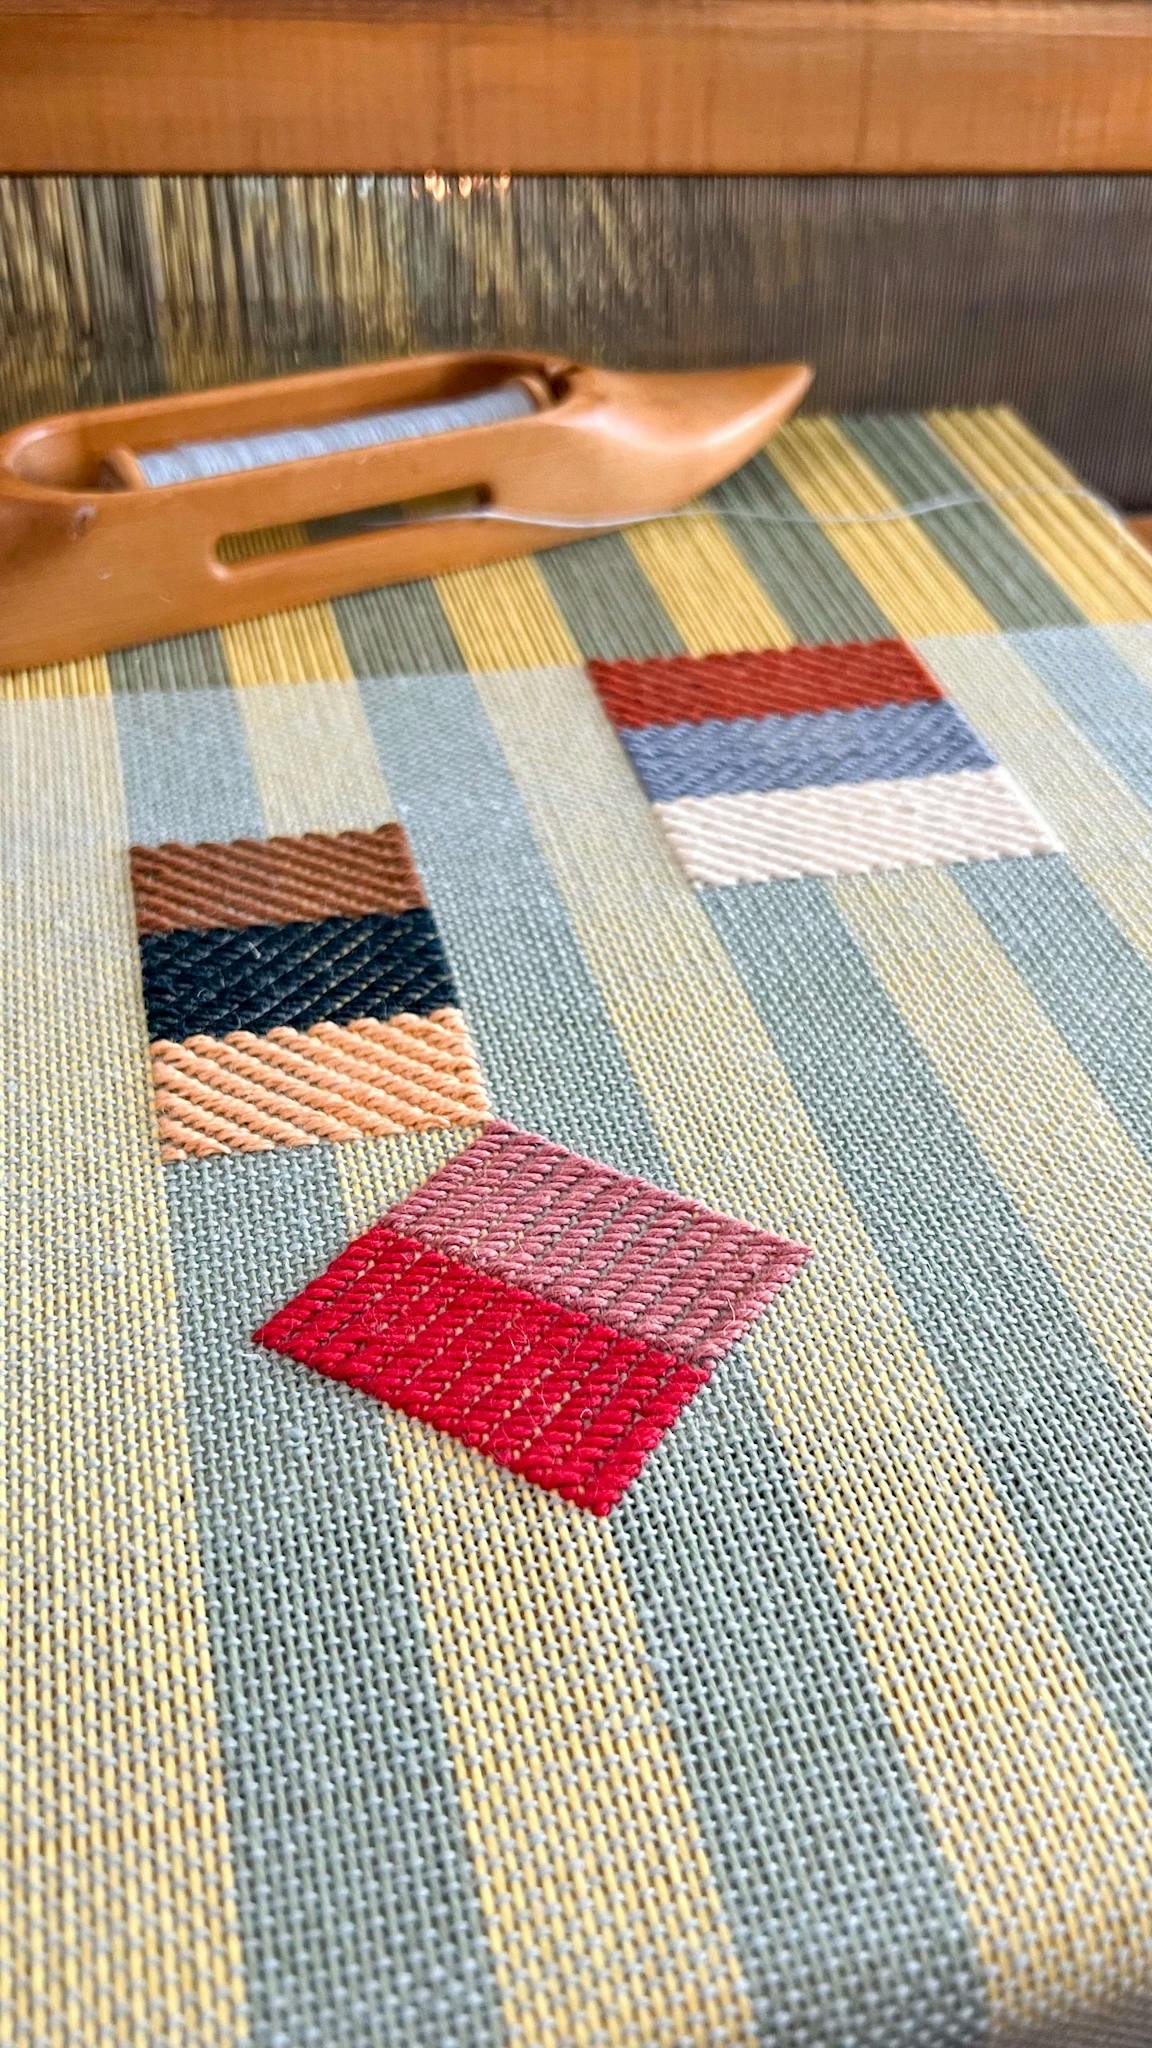 A close-up of a striped artwork by Sarah Sullivan Sherrod with a loom in the background.